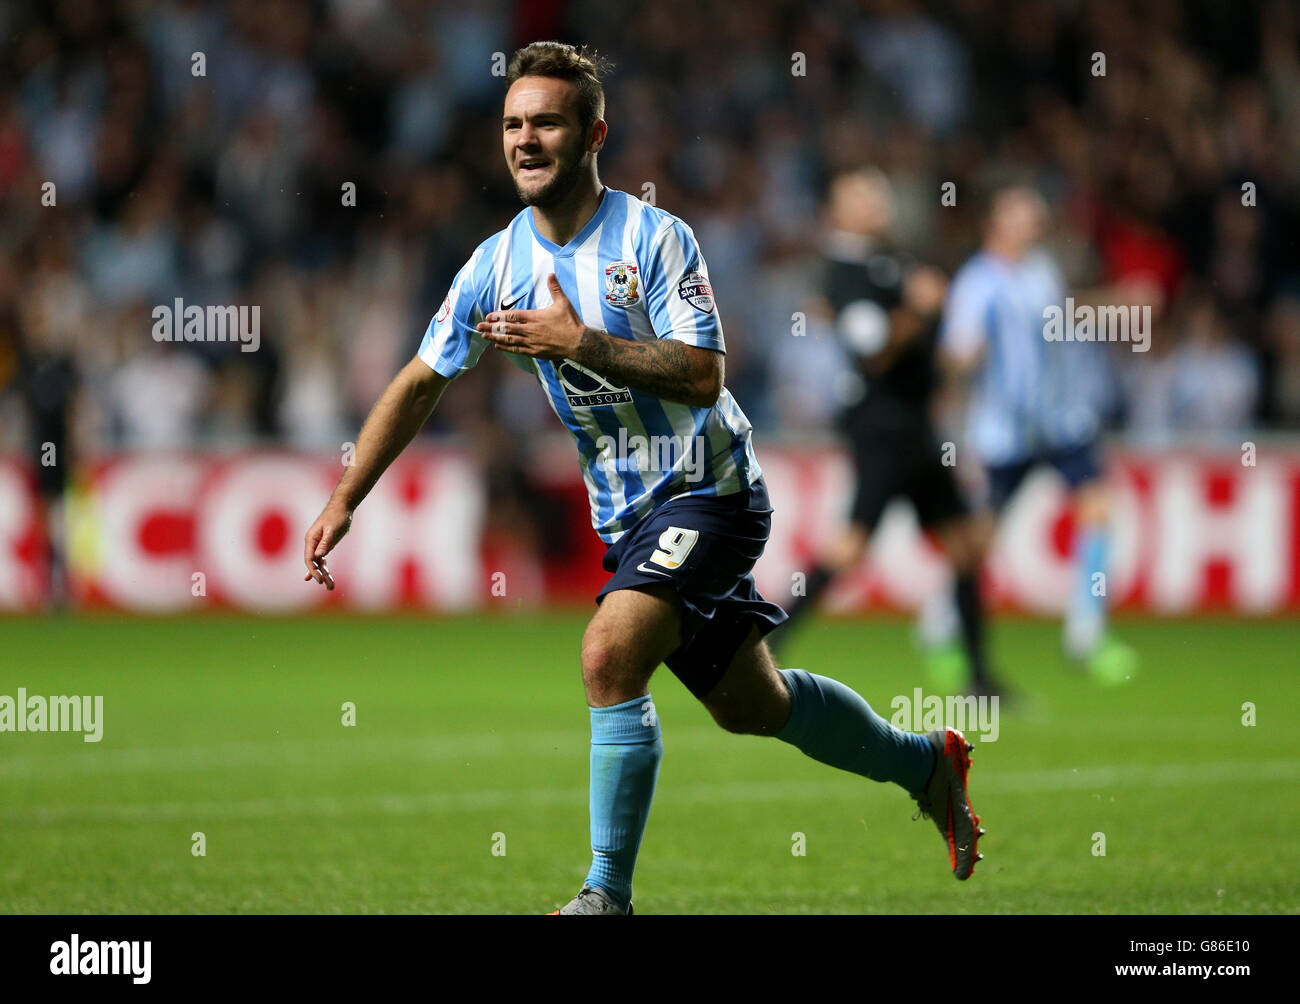 Coventry City's Adam Armstrong celebrates scoring his side's second goal of the game during the Sky Bet League One match at the Ricoh Arena, Coventry. Stock Photo